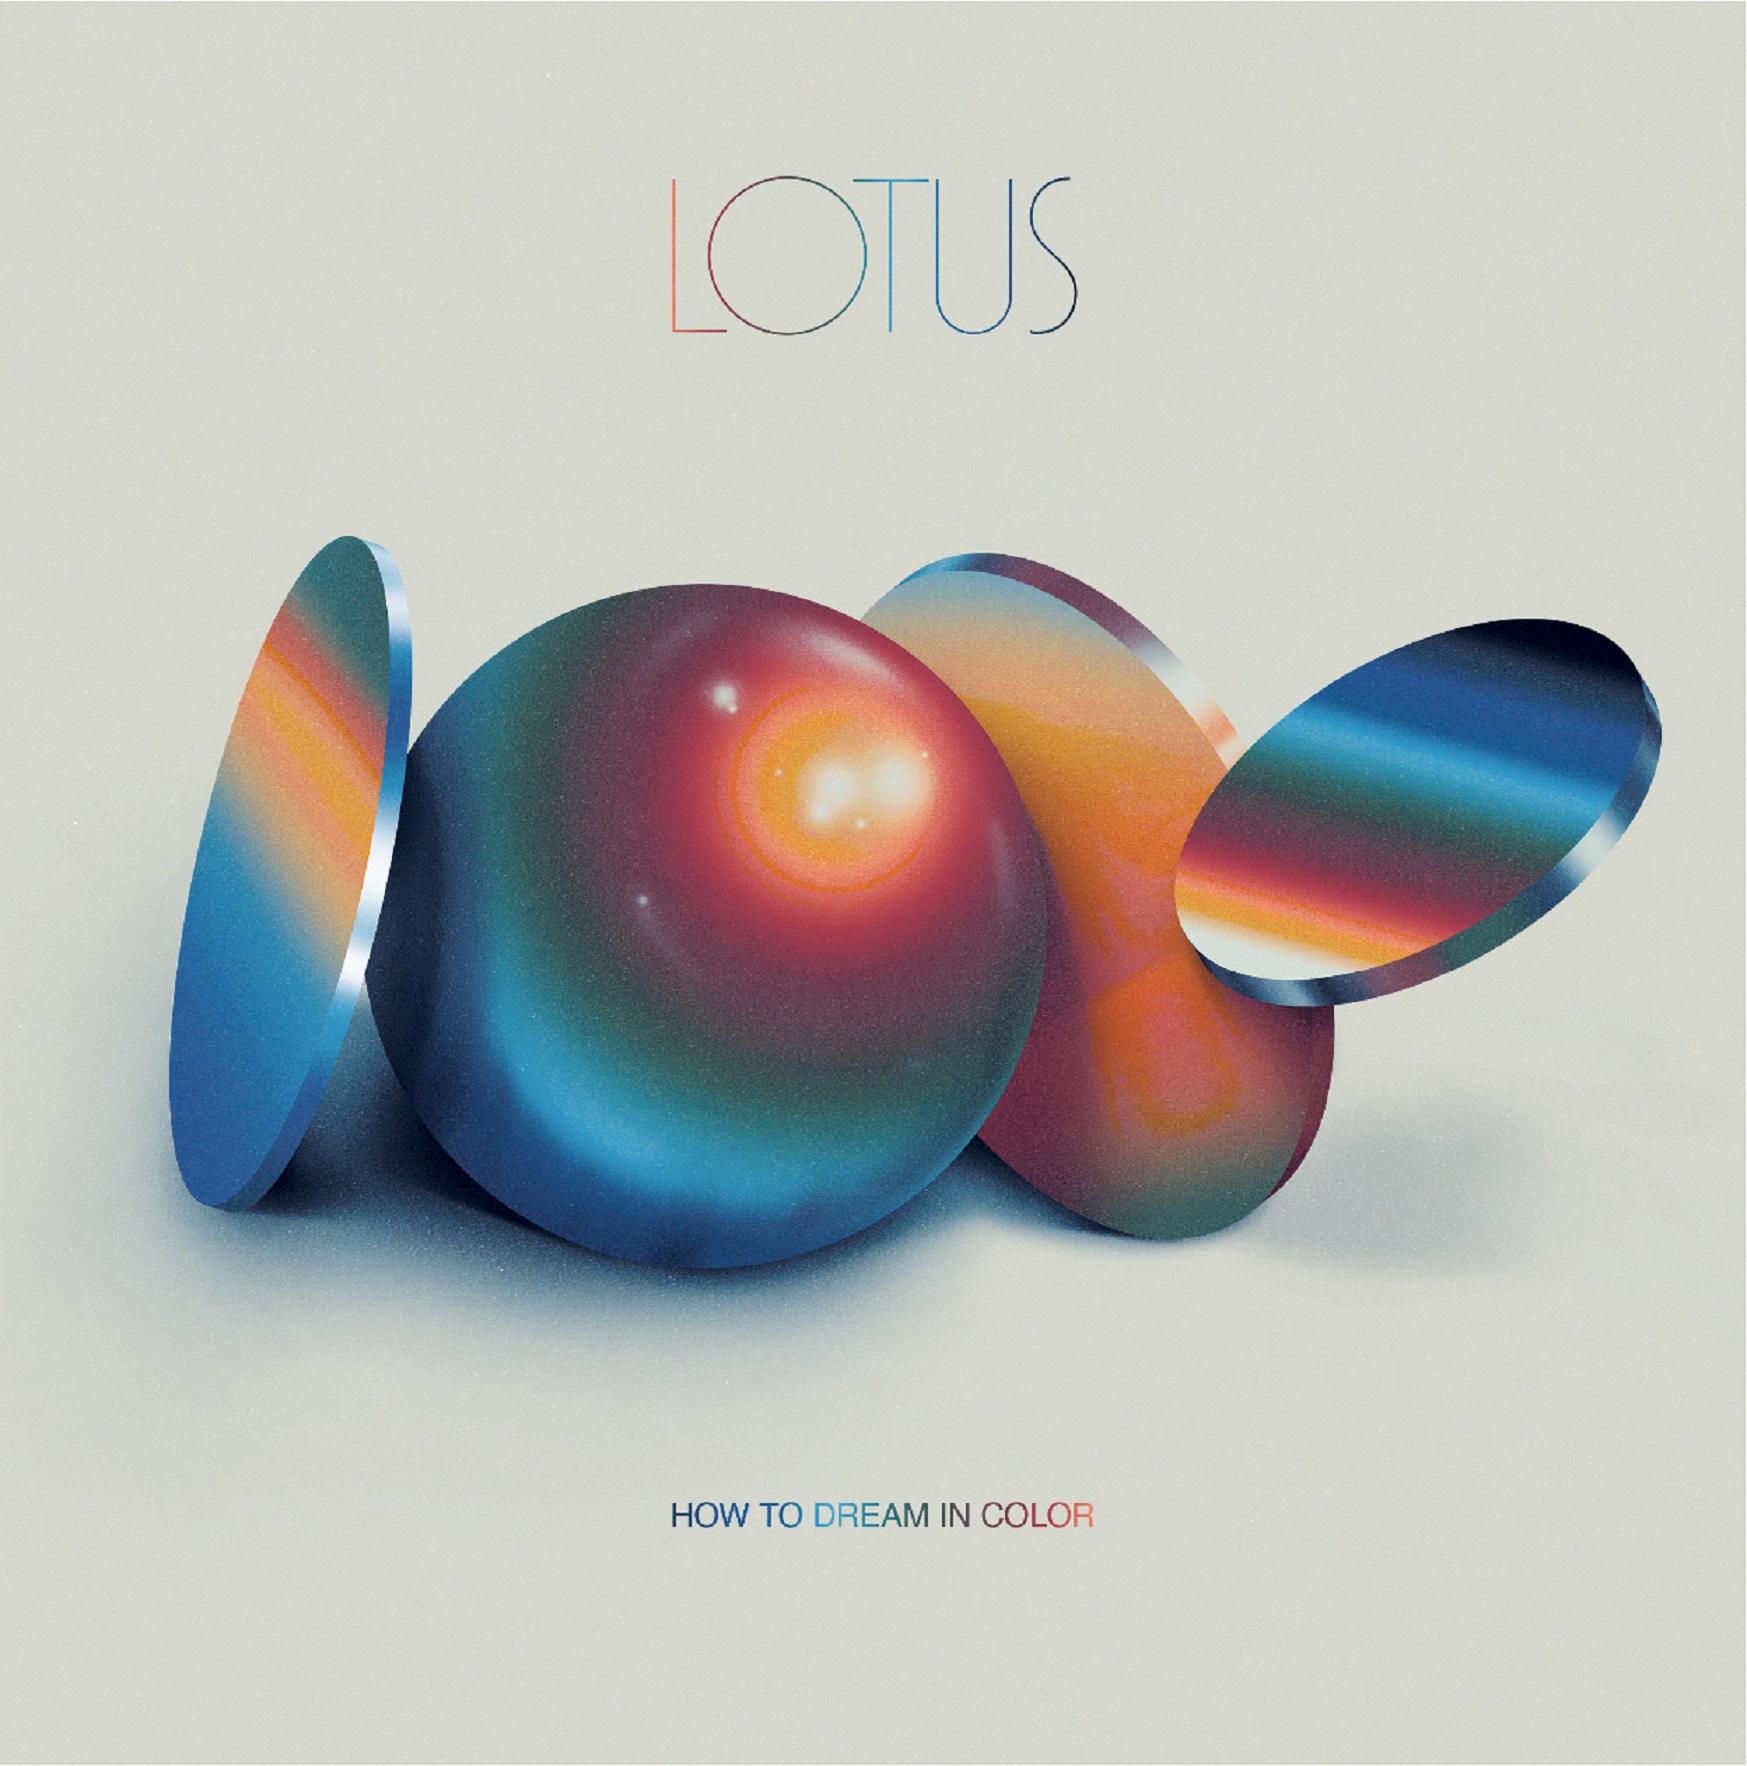 Lotus Announces Forthcoming Studio Album, "How to Dream in Color" | New Single Now Streaming